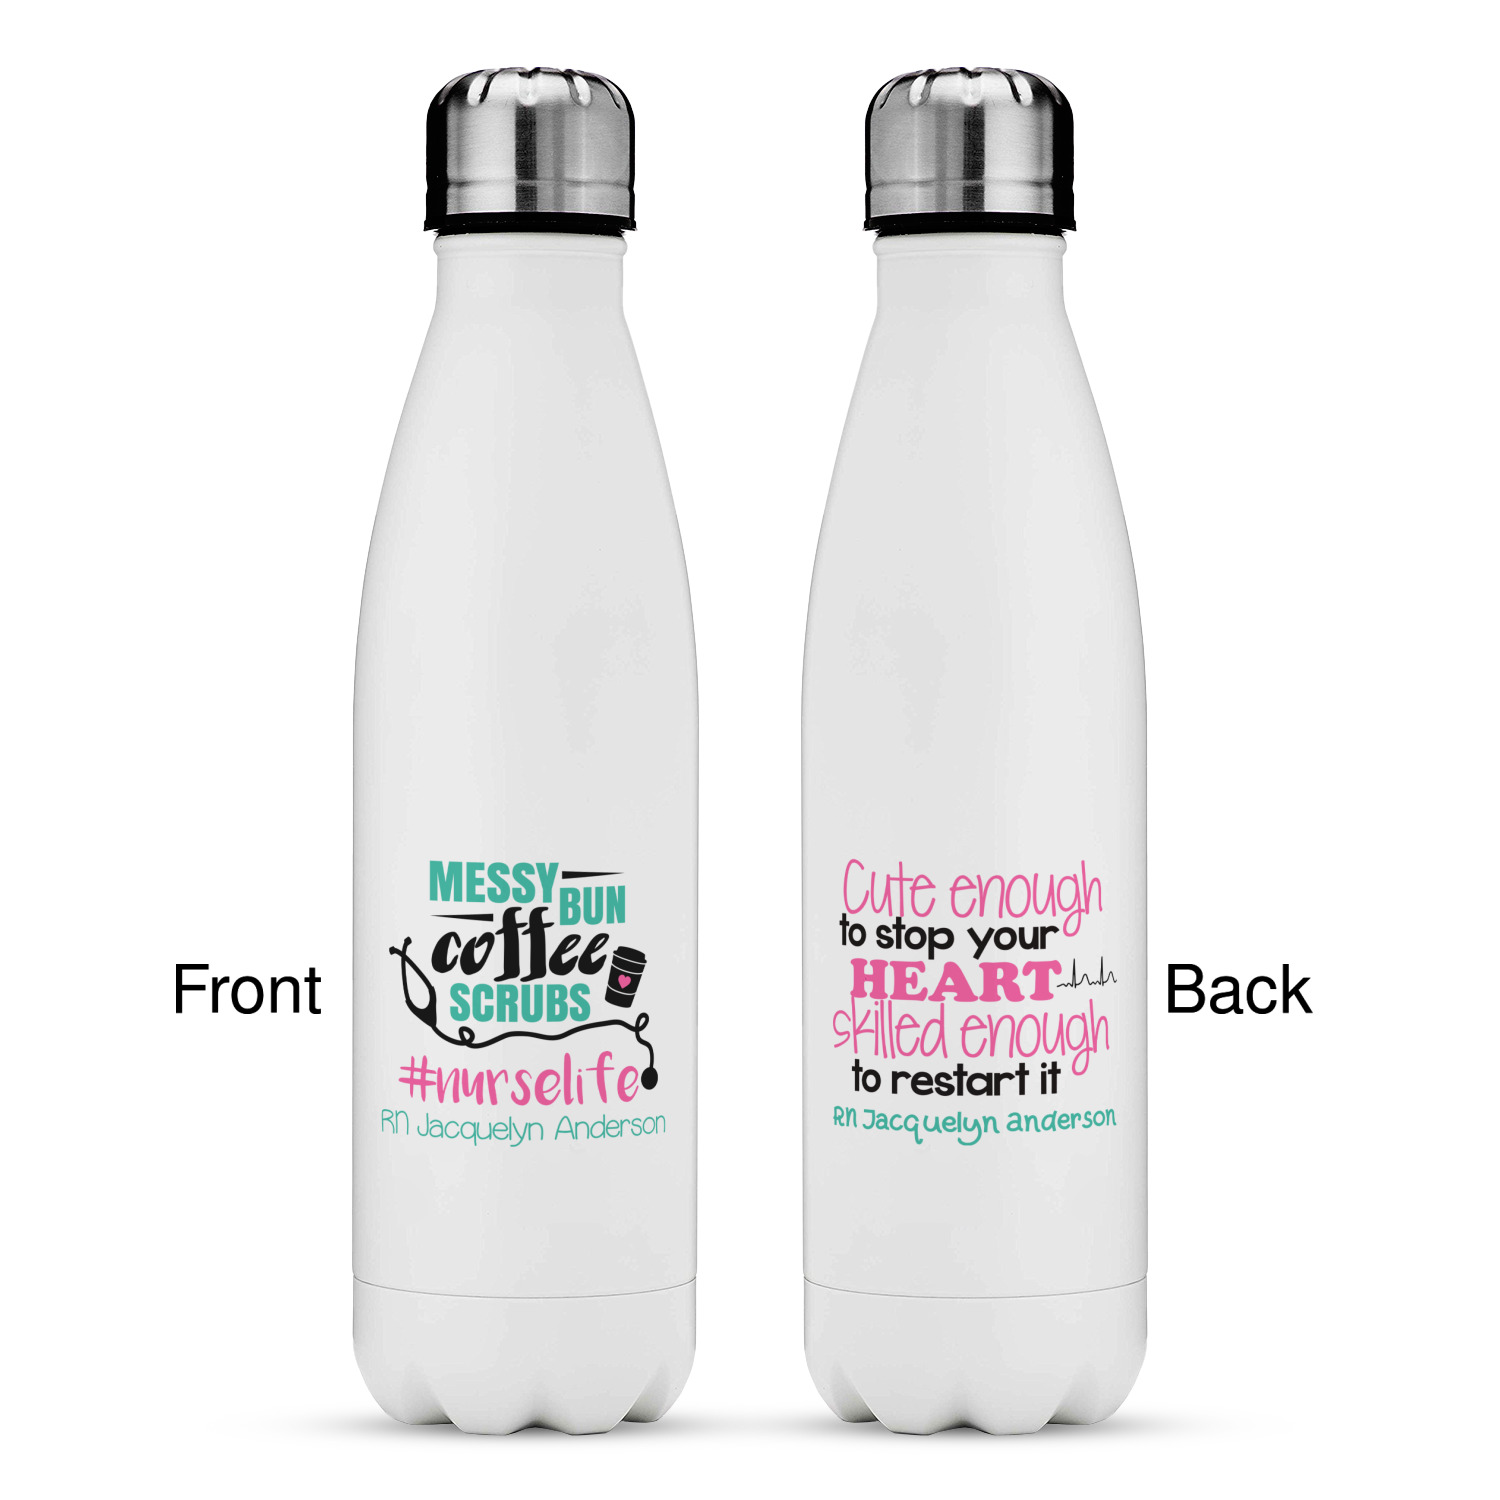 https://www.youcustomizeit.com/common/MAKE/1931369/Nursing-Quotes-Tapered-Water-Bottle-Apvl.jpg?lm=1690566459